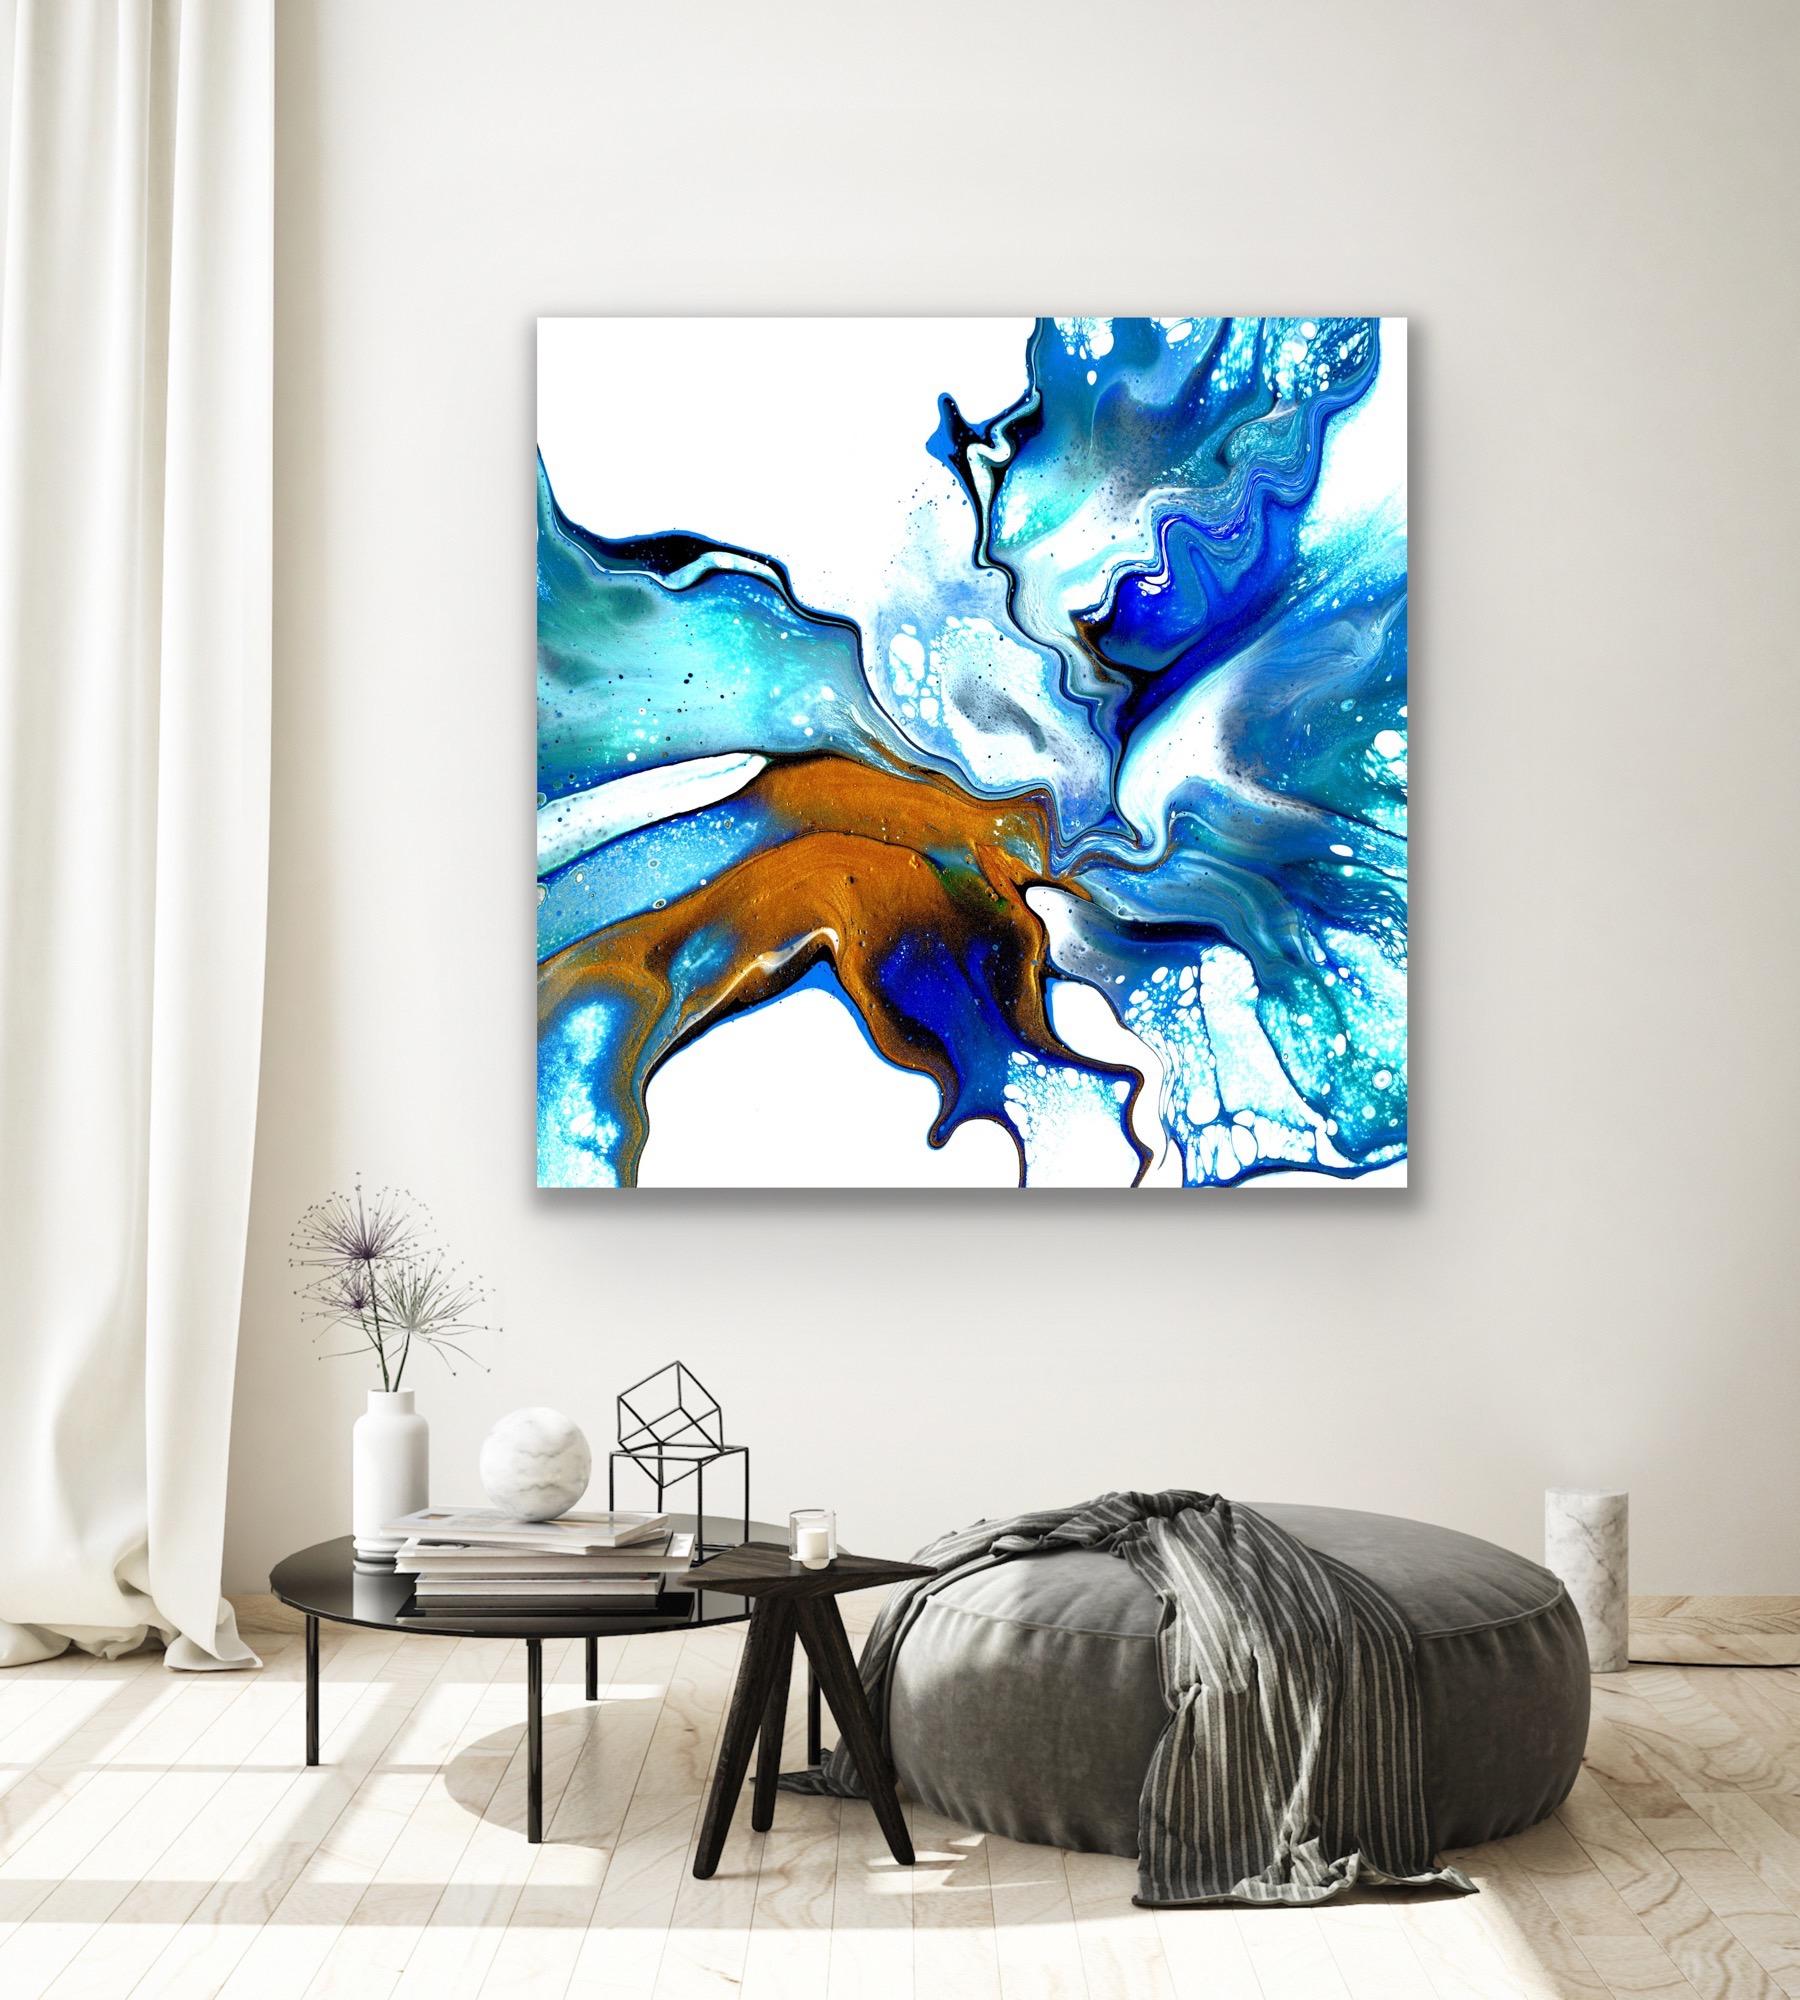 Abstract Modern Painting, Contemporary Large Giclee Print, LE Signed by Artist. 3